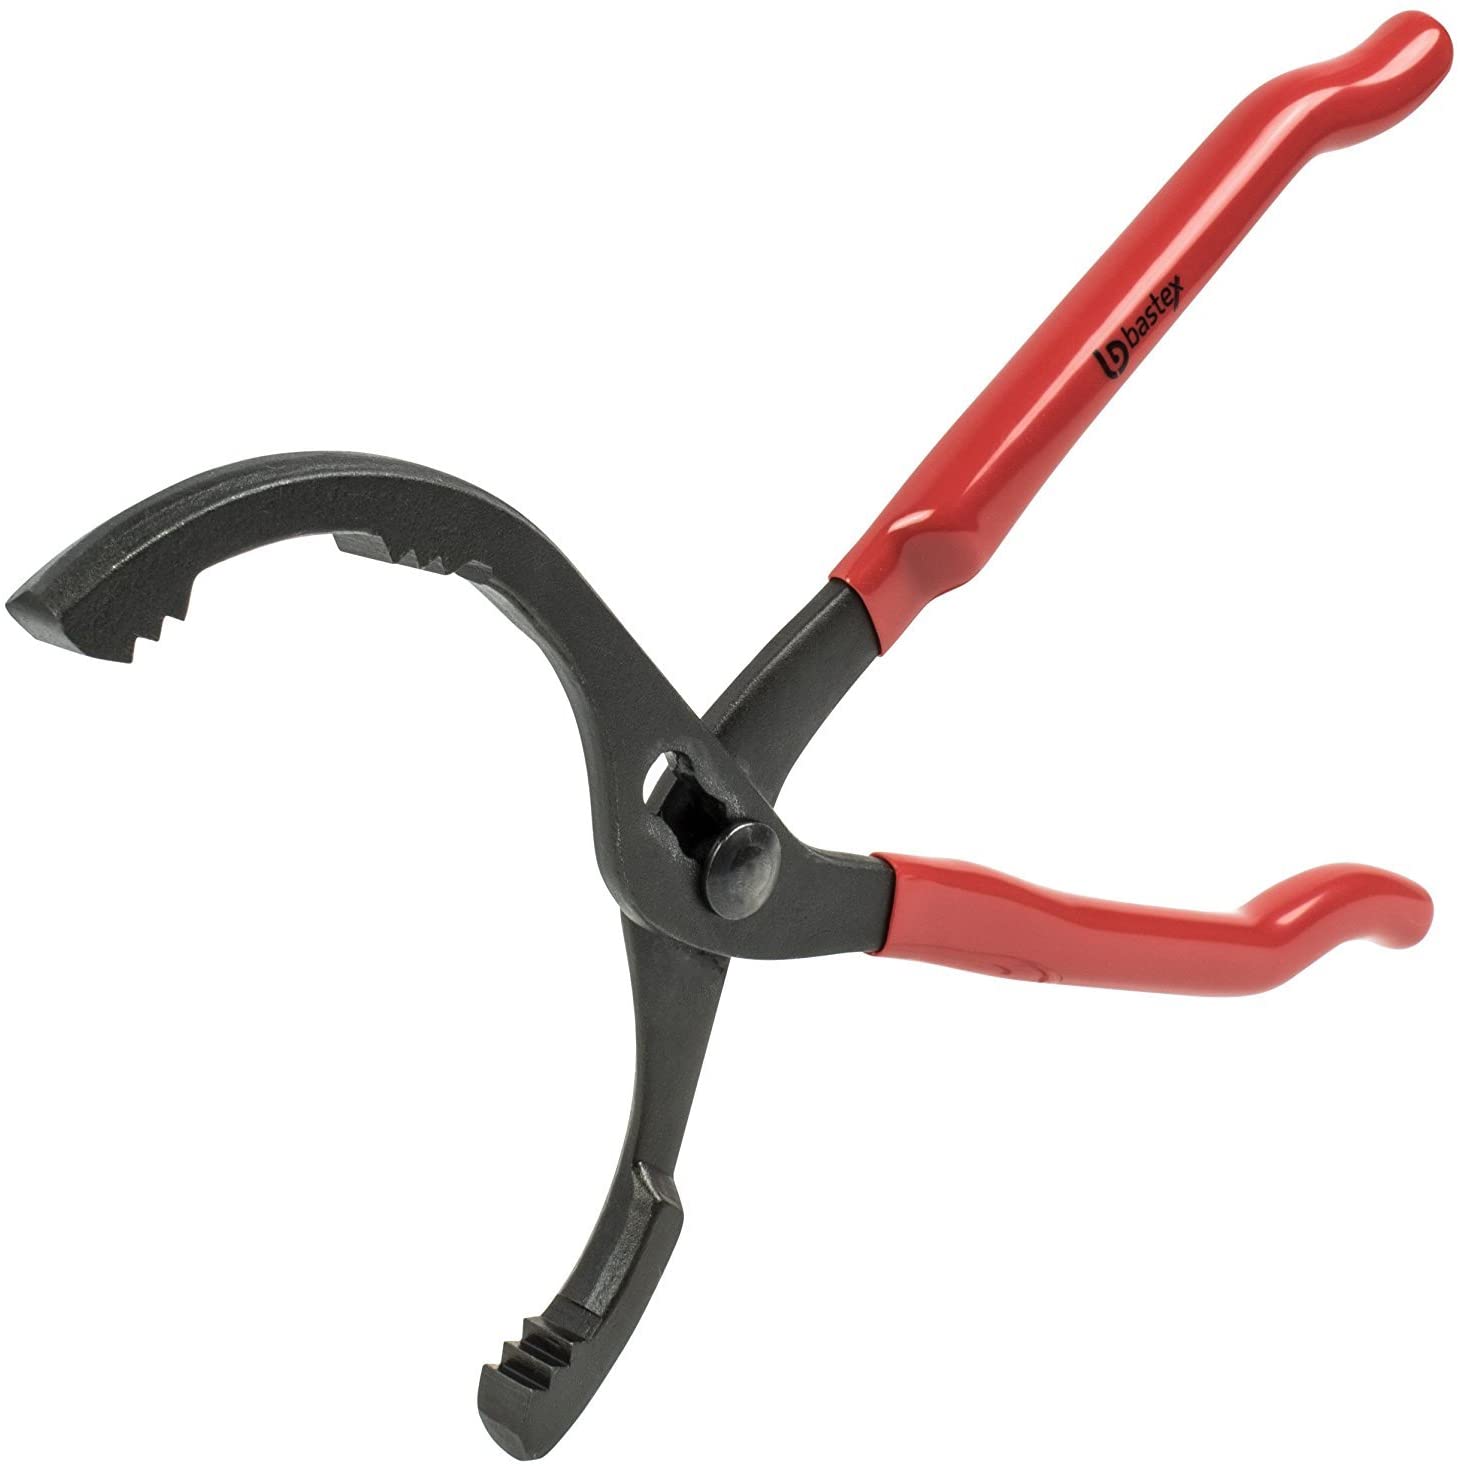 Bastex Oil Filter Wrench Pliers, 12-Inch